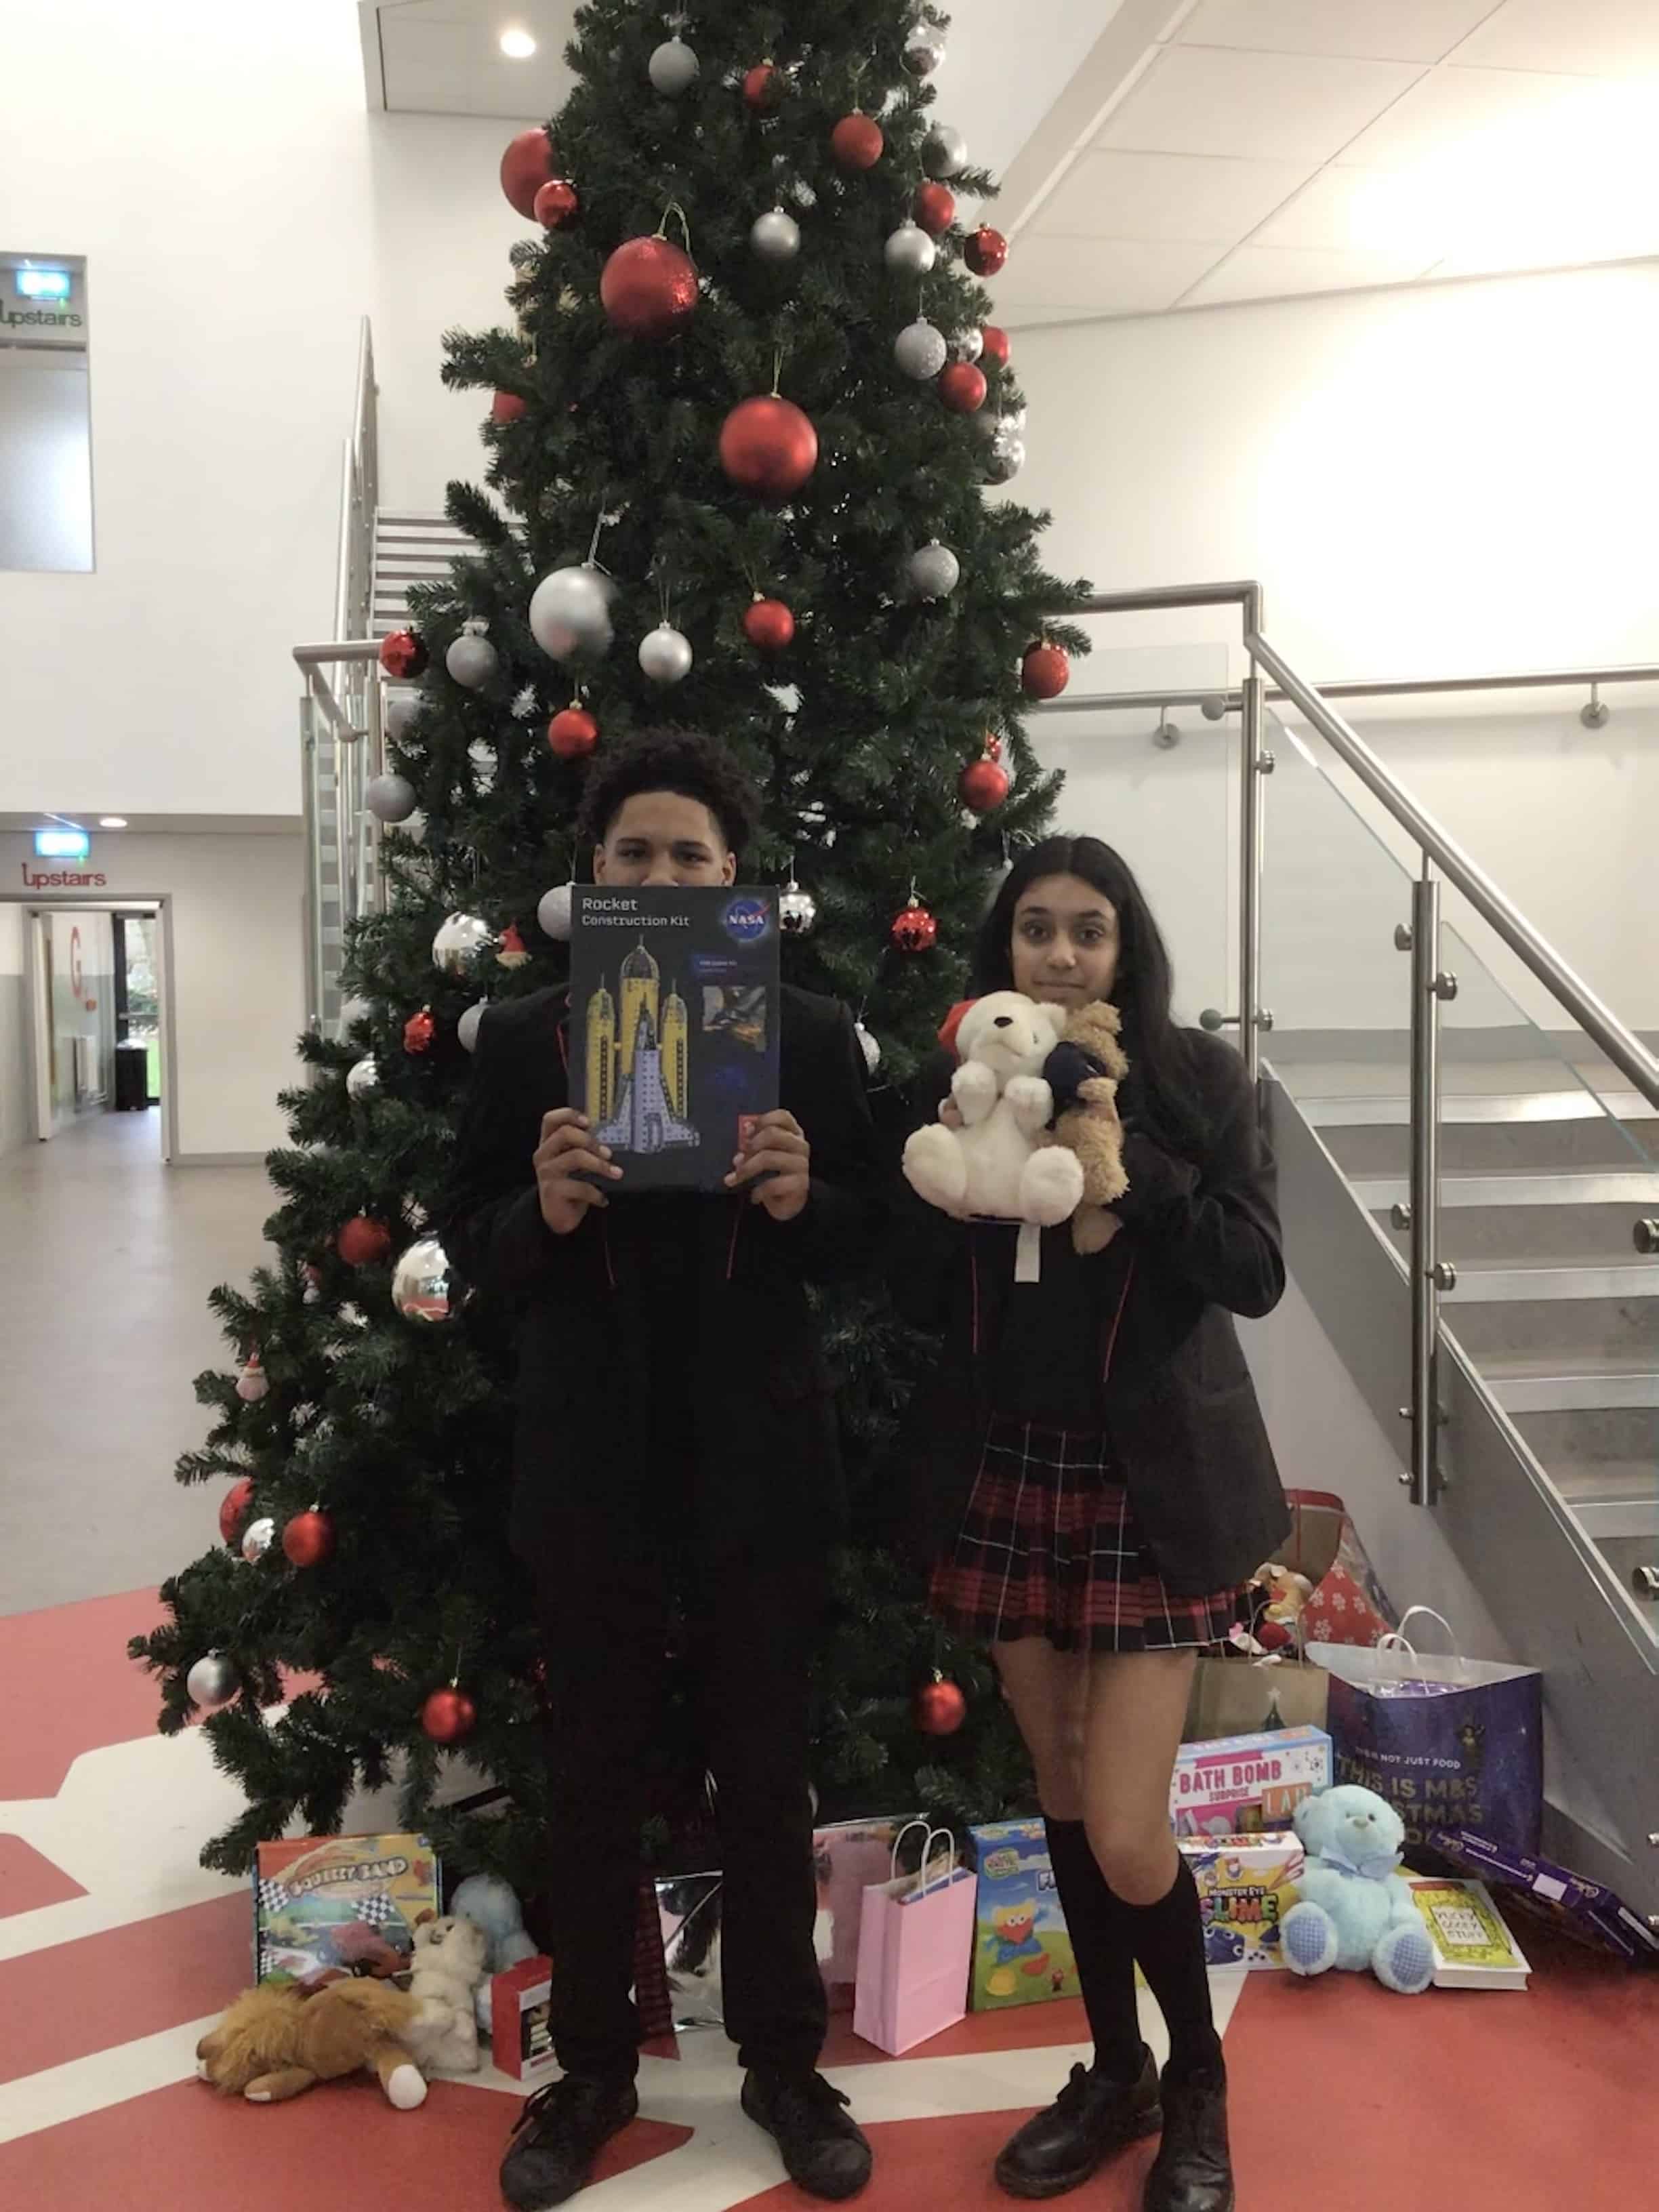 Head Prefects Twalha and Mya stand in front of the Christmas tree at Didsbury High School holding items donated by the school community for Mission Christmas.